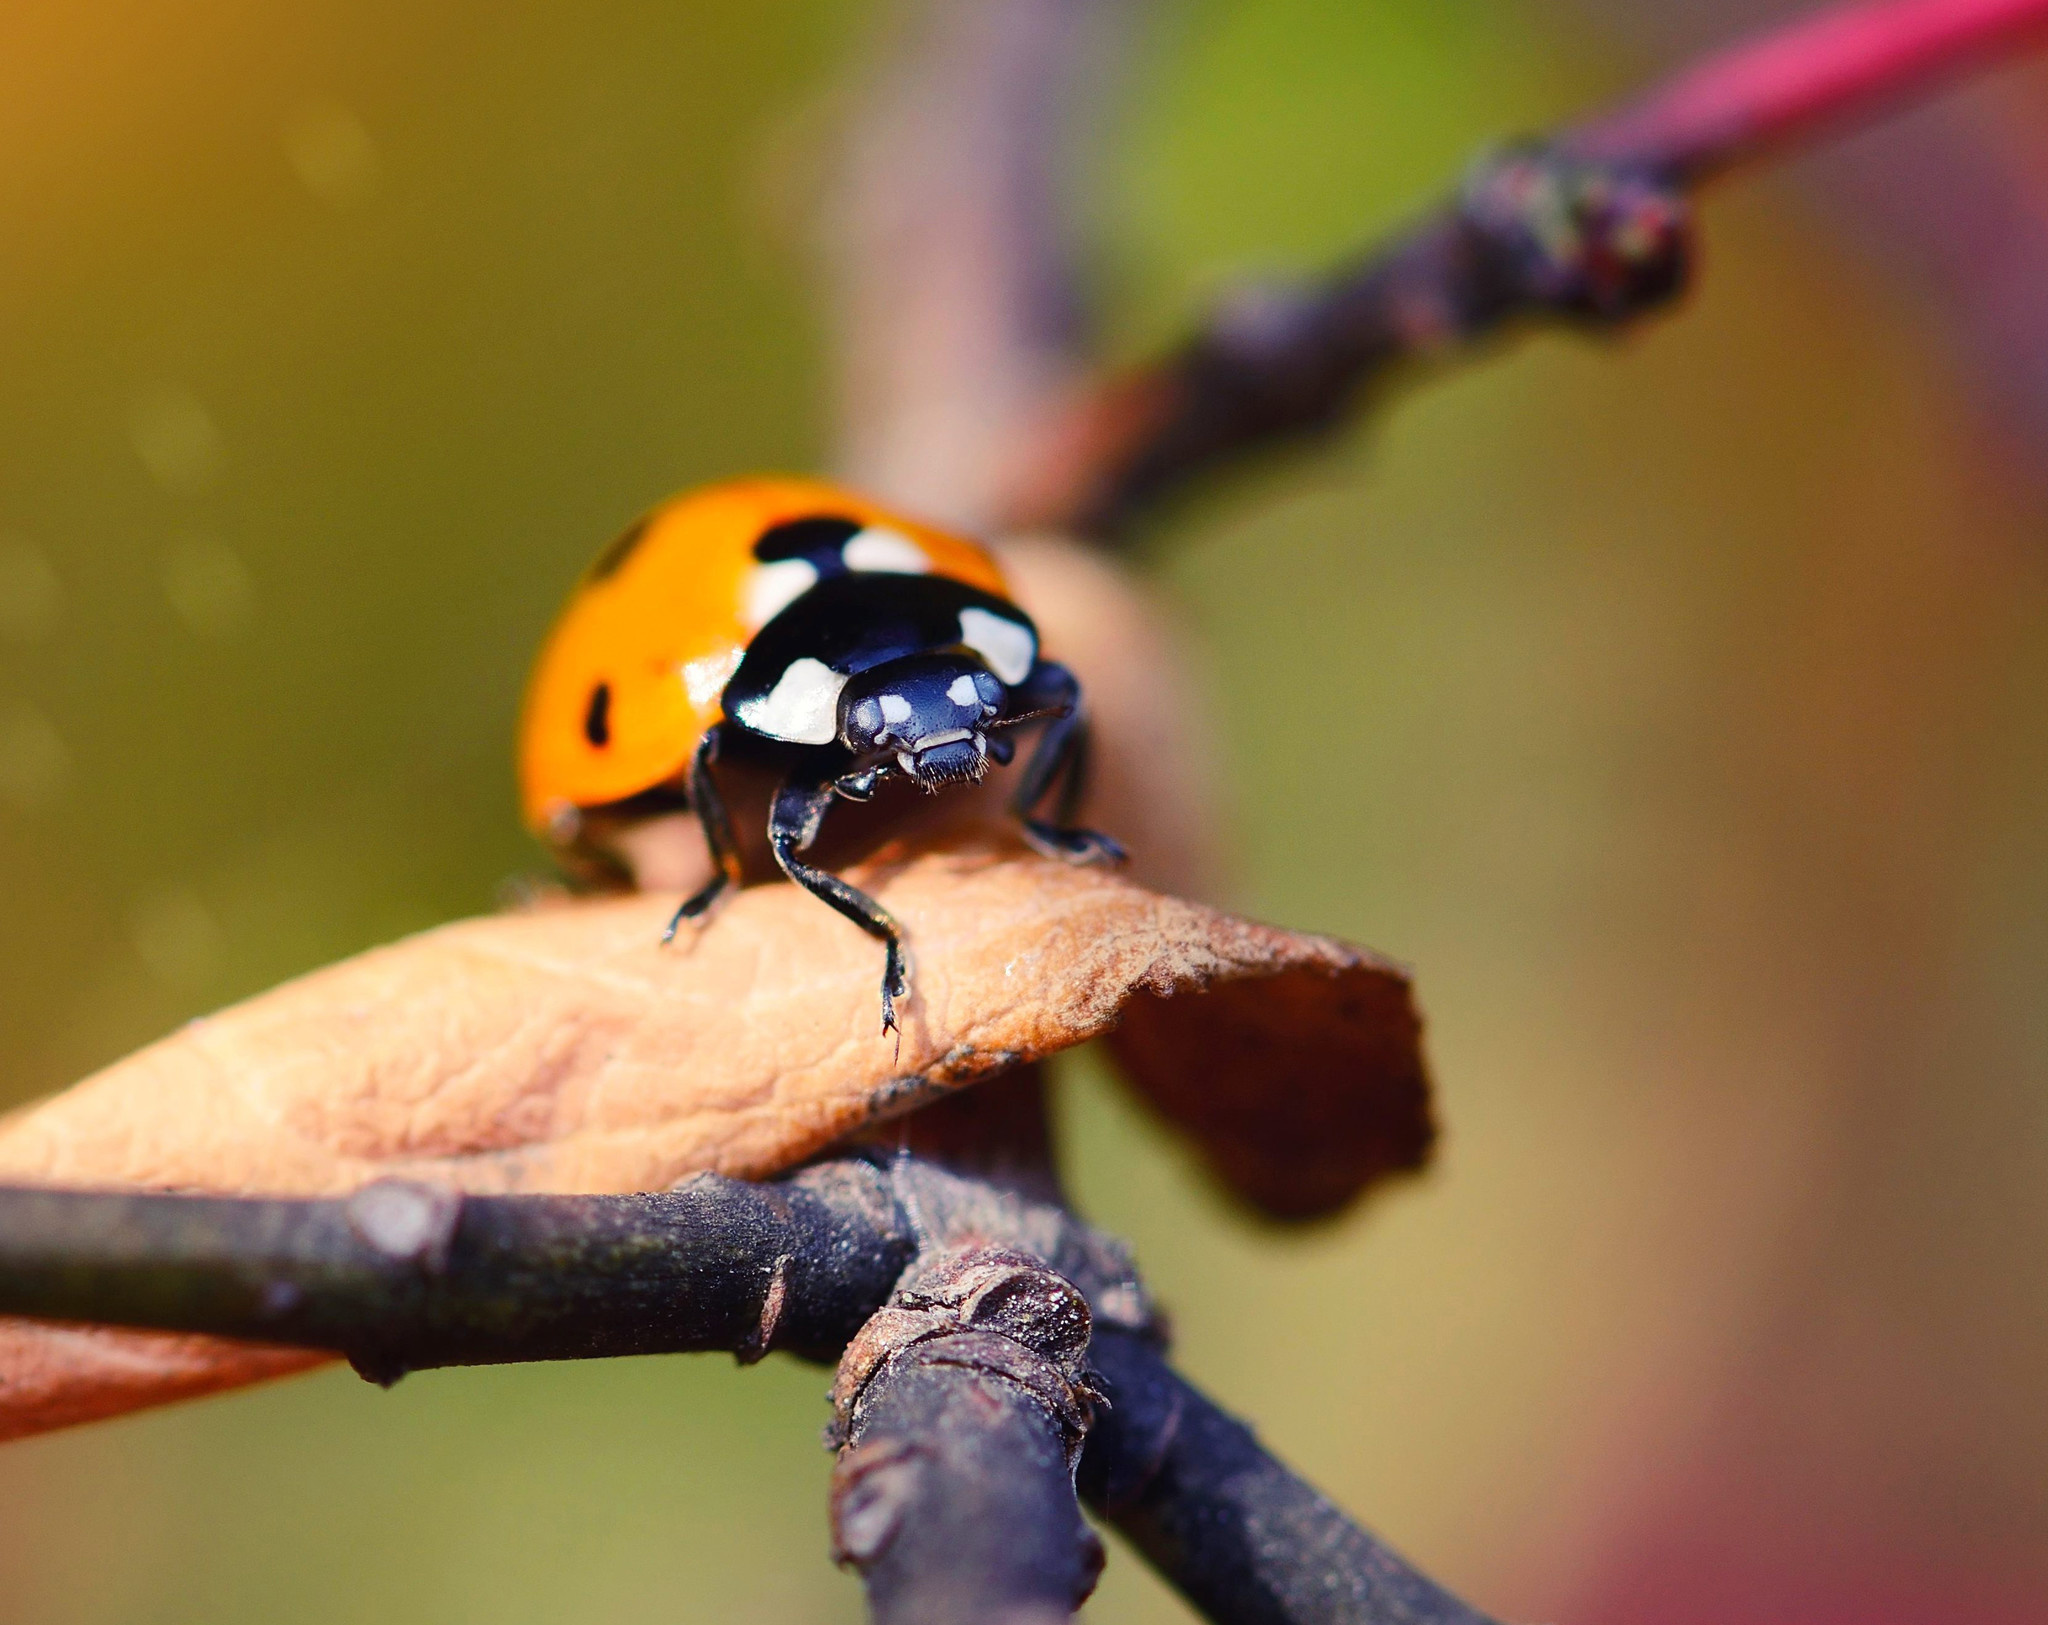 What insects should you have in your garden?